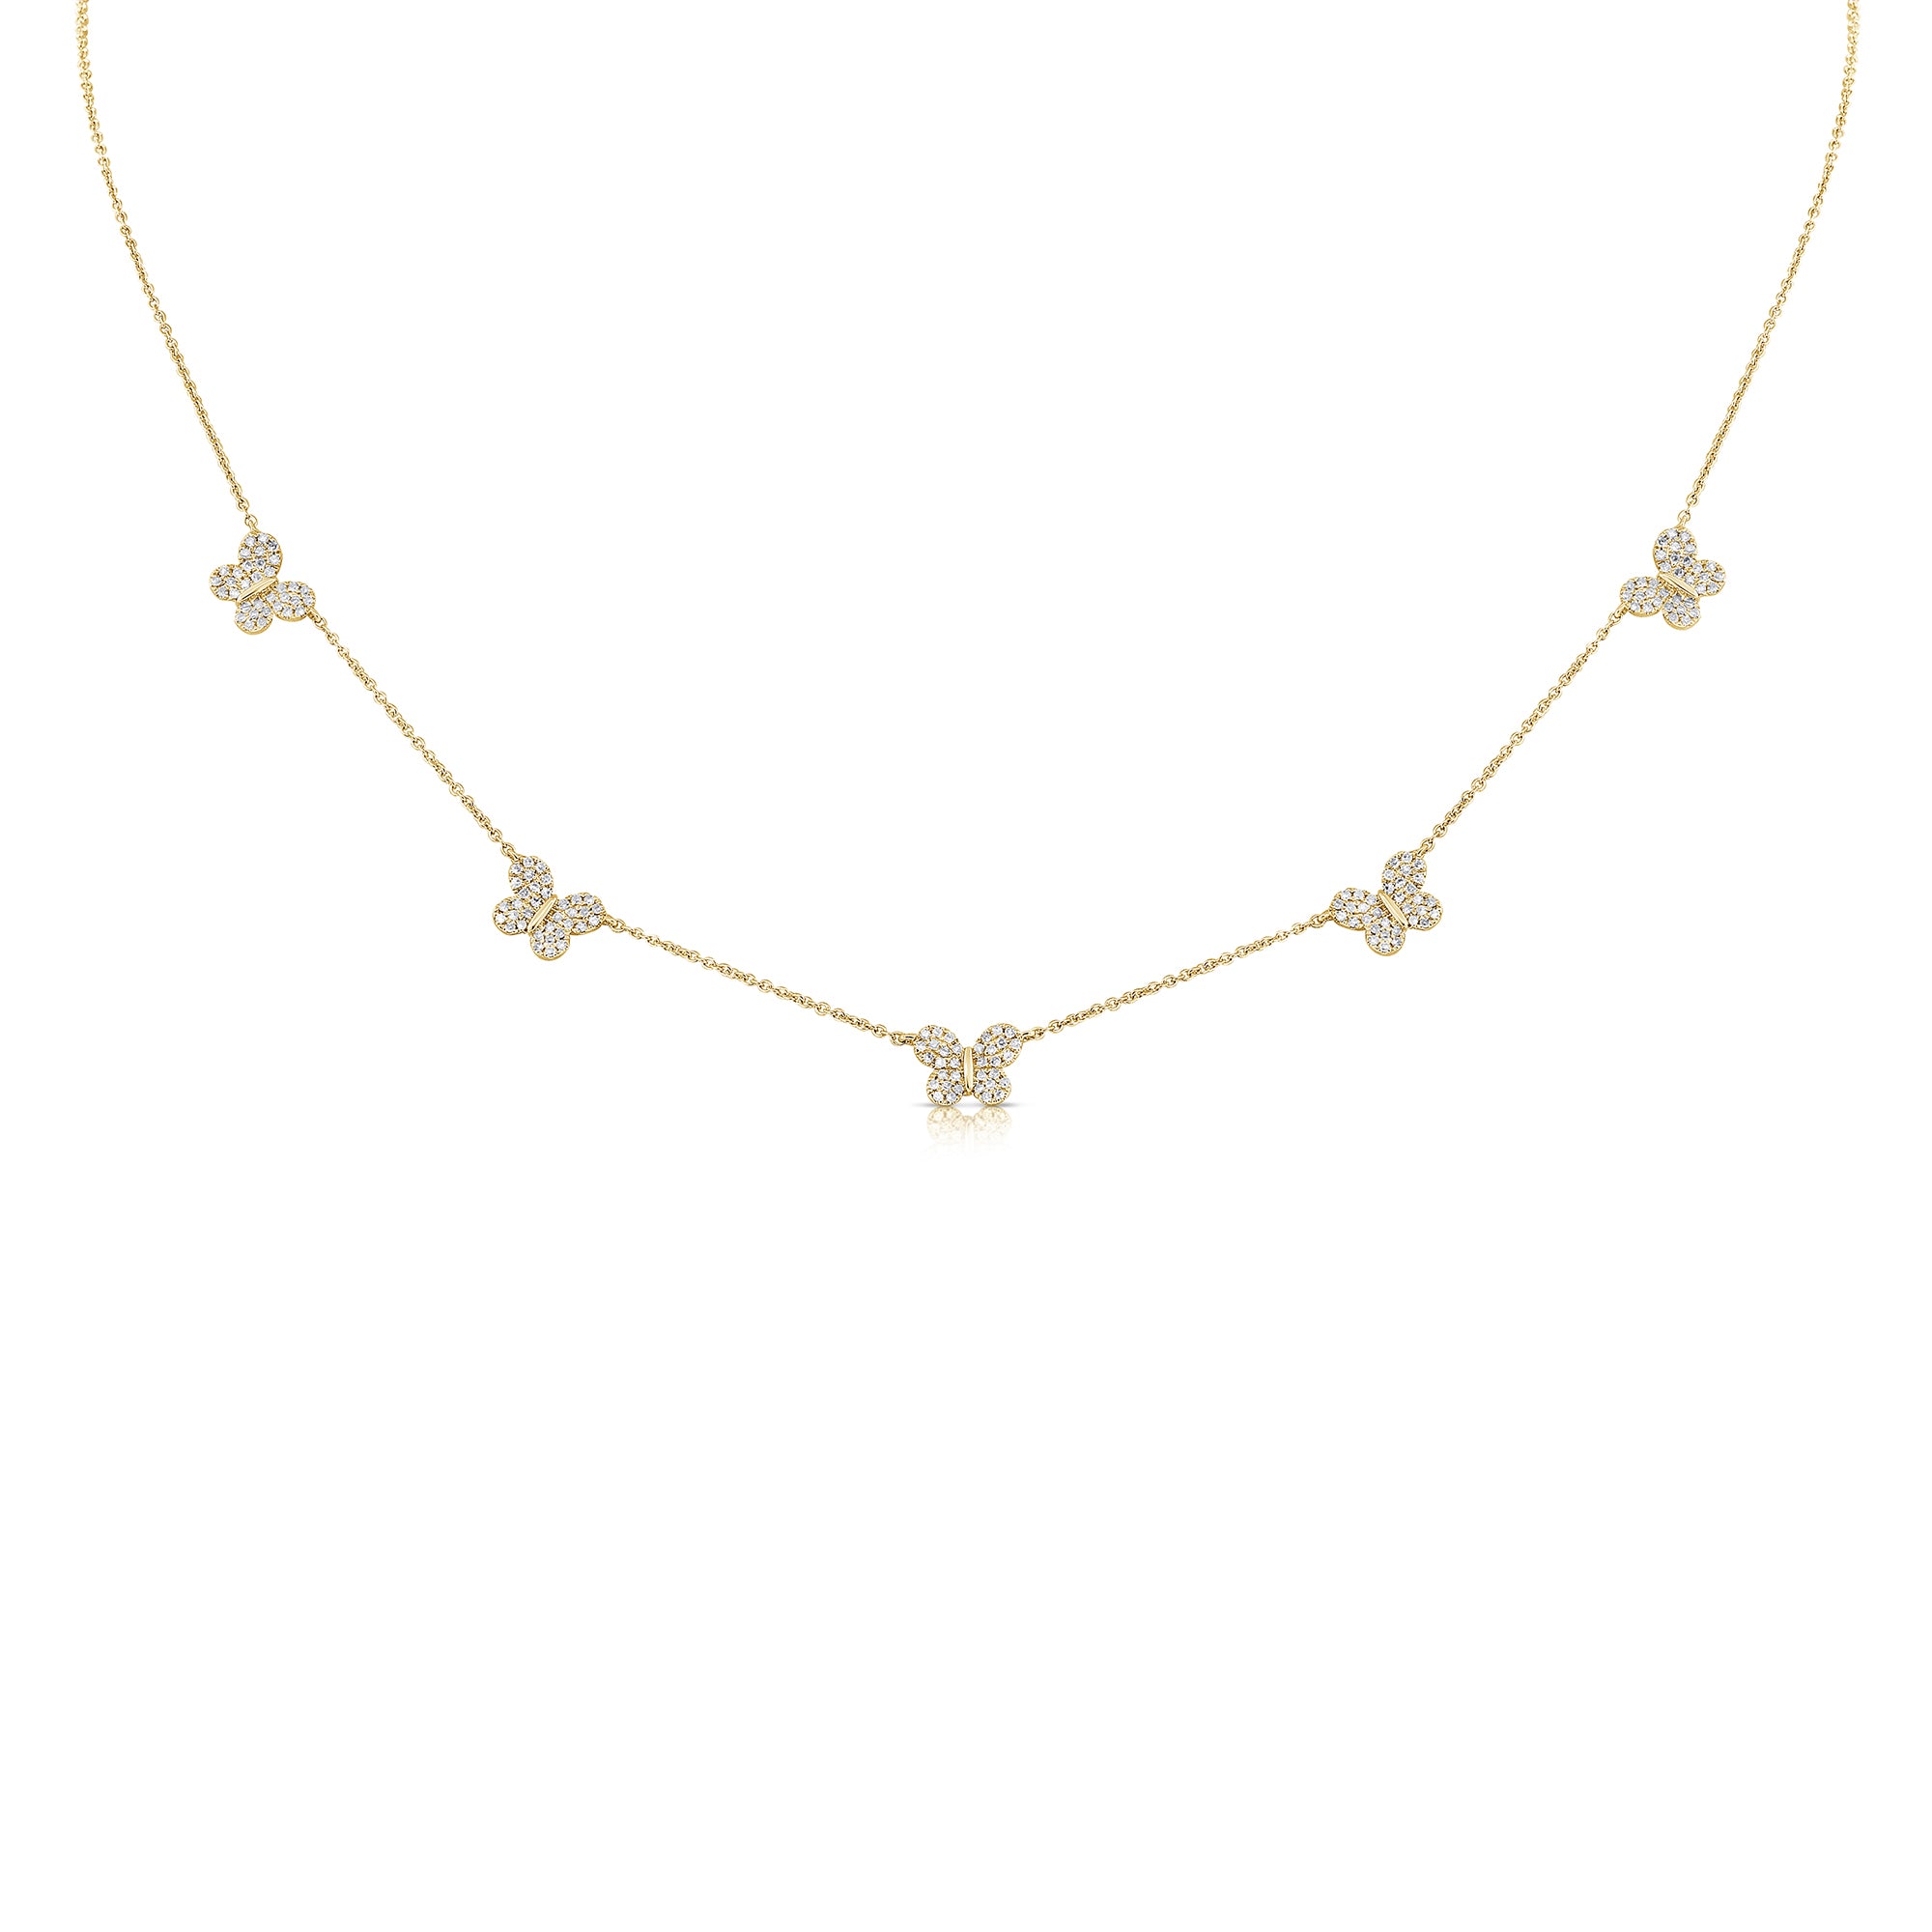 Diamond Butterfly Studded Necklace - 14K yellow gold weighing 3.23 grams - 170 round diamonds totaling 0.41 carats